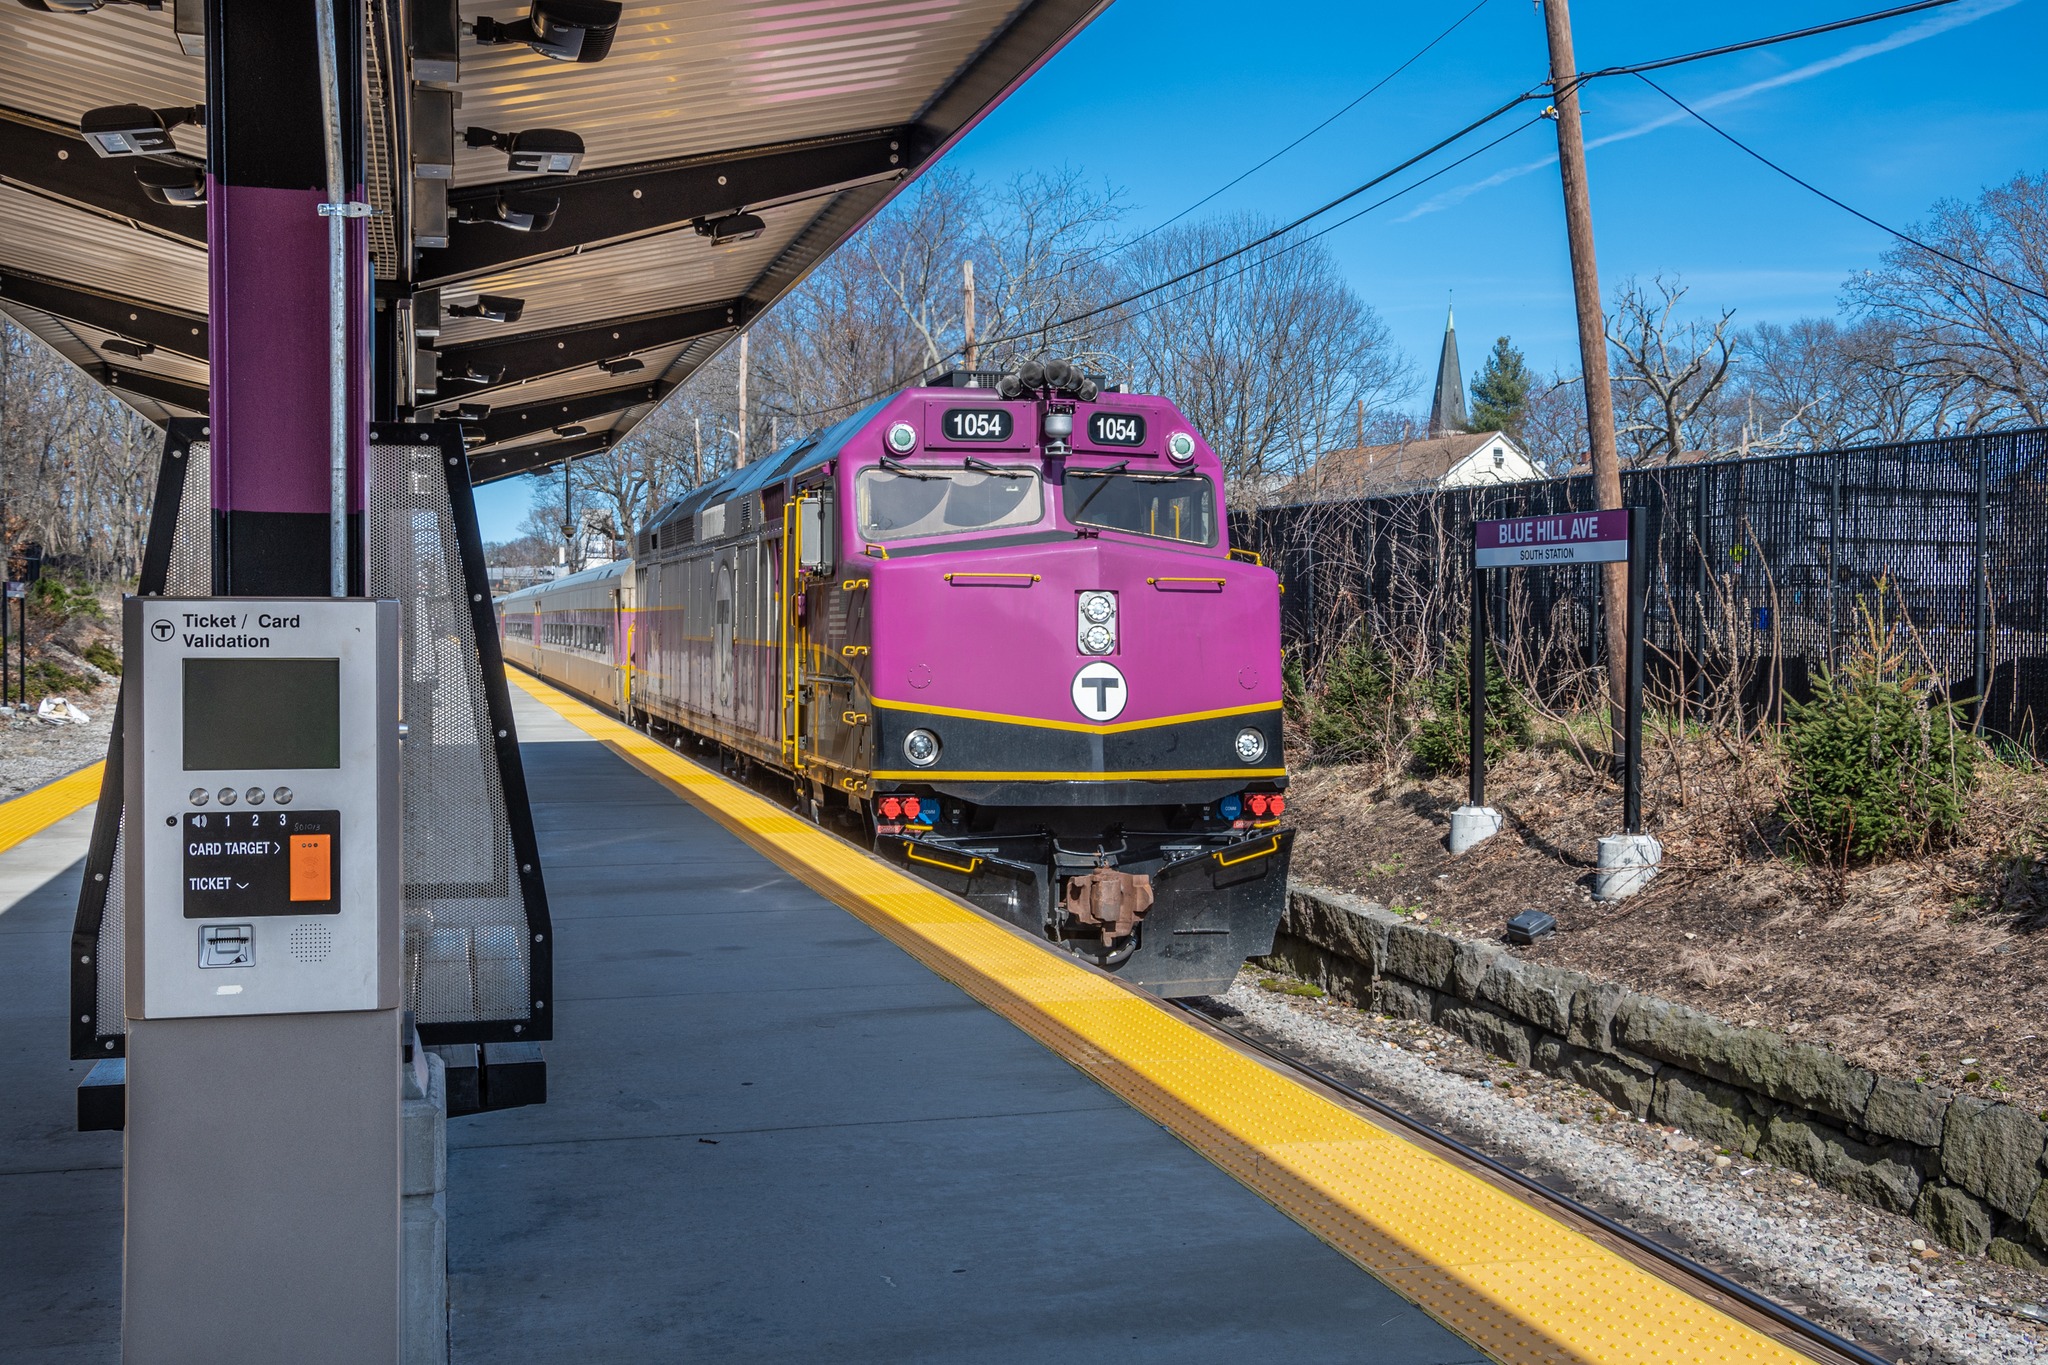 Commuter rail train with purple locomotive arrives at station